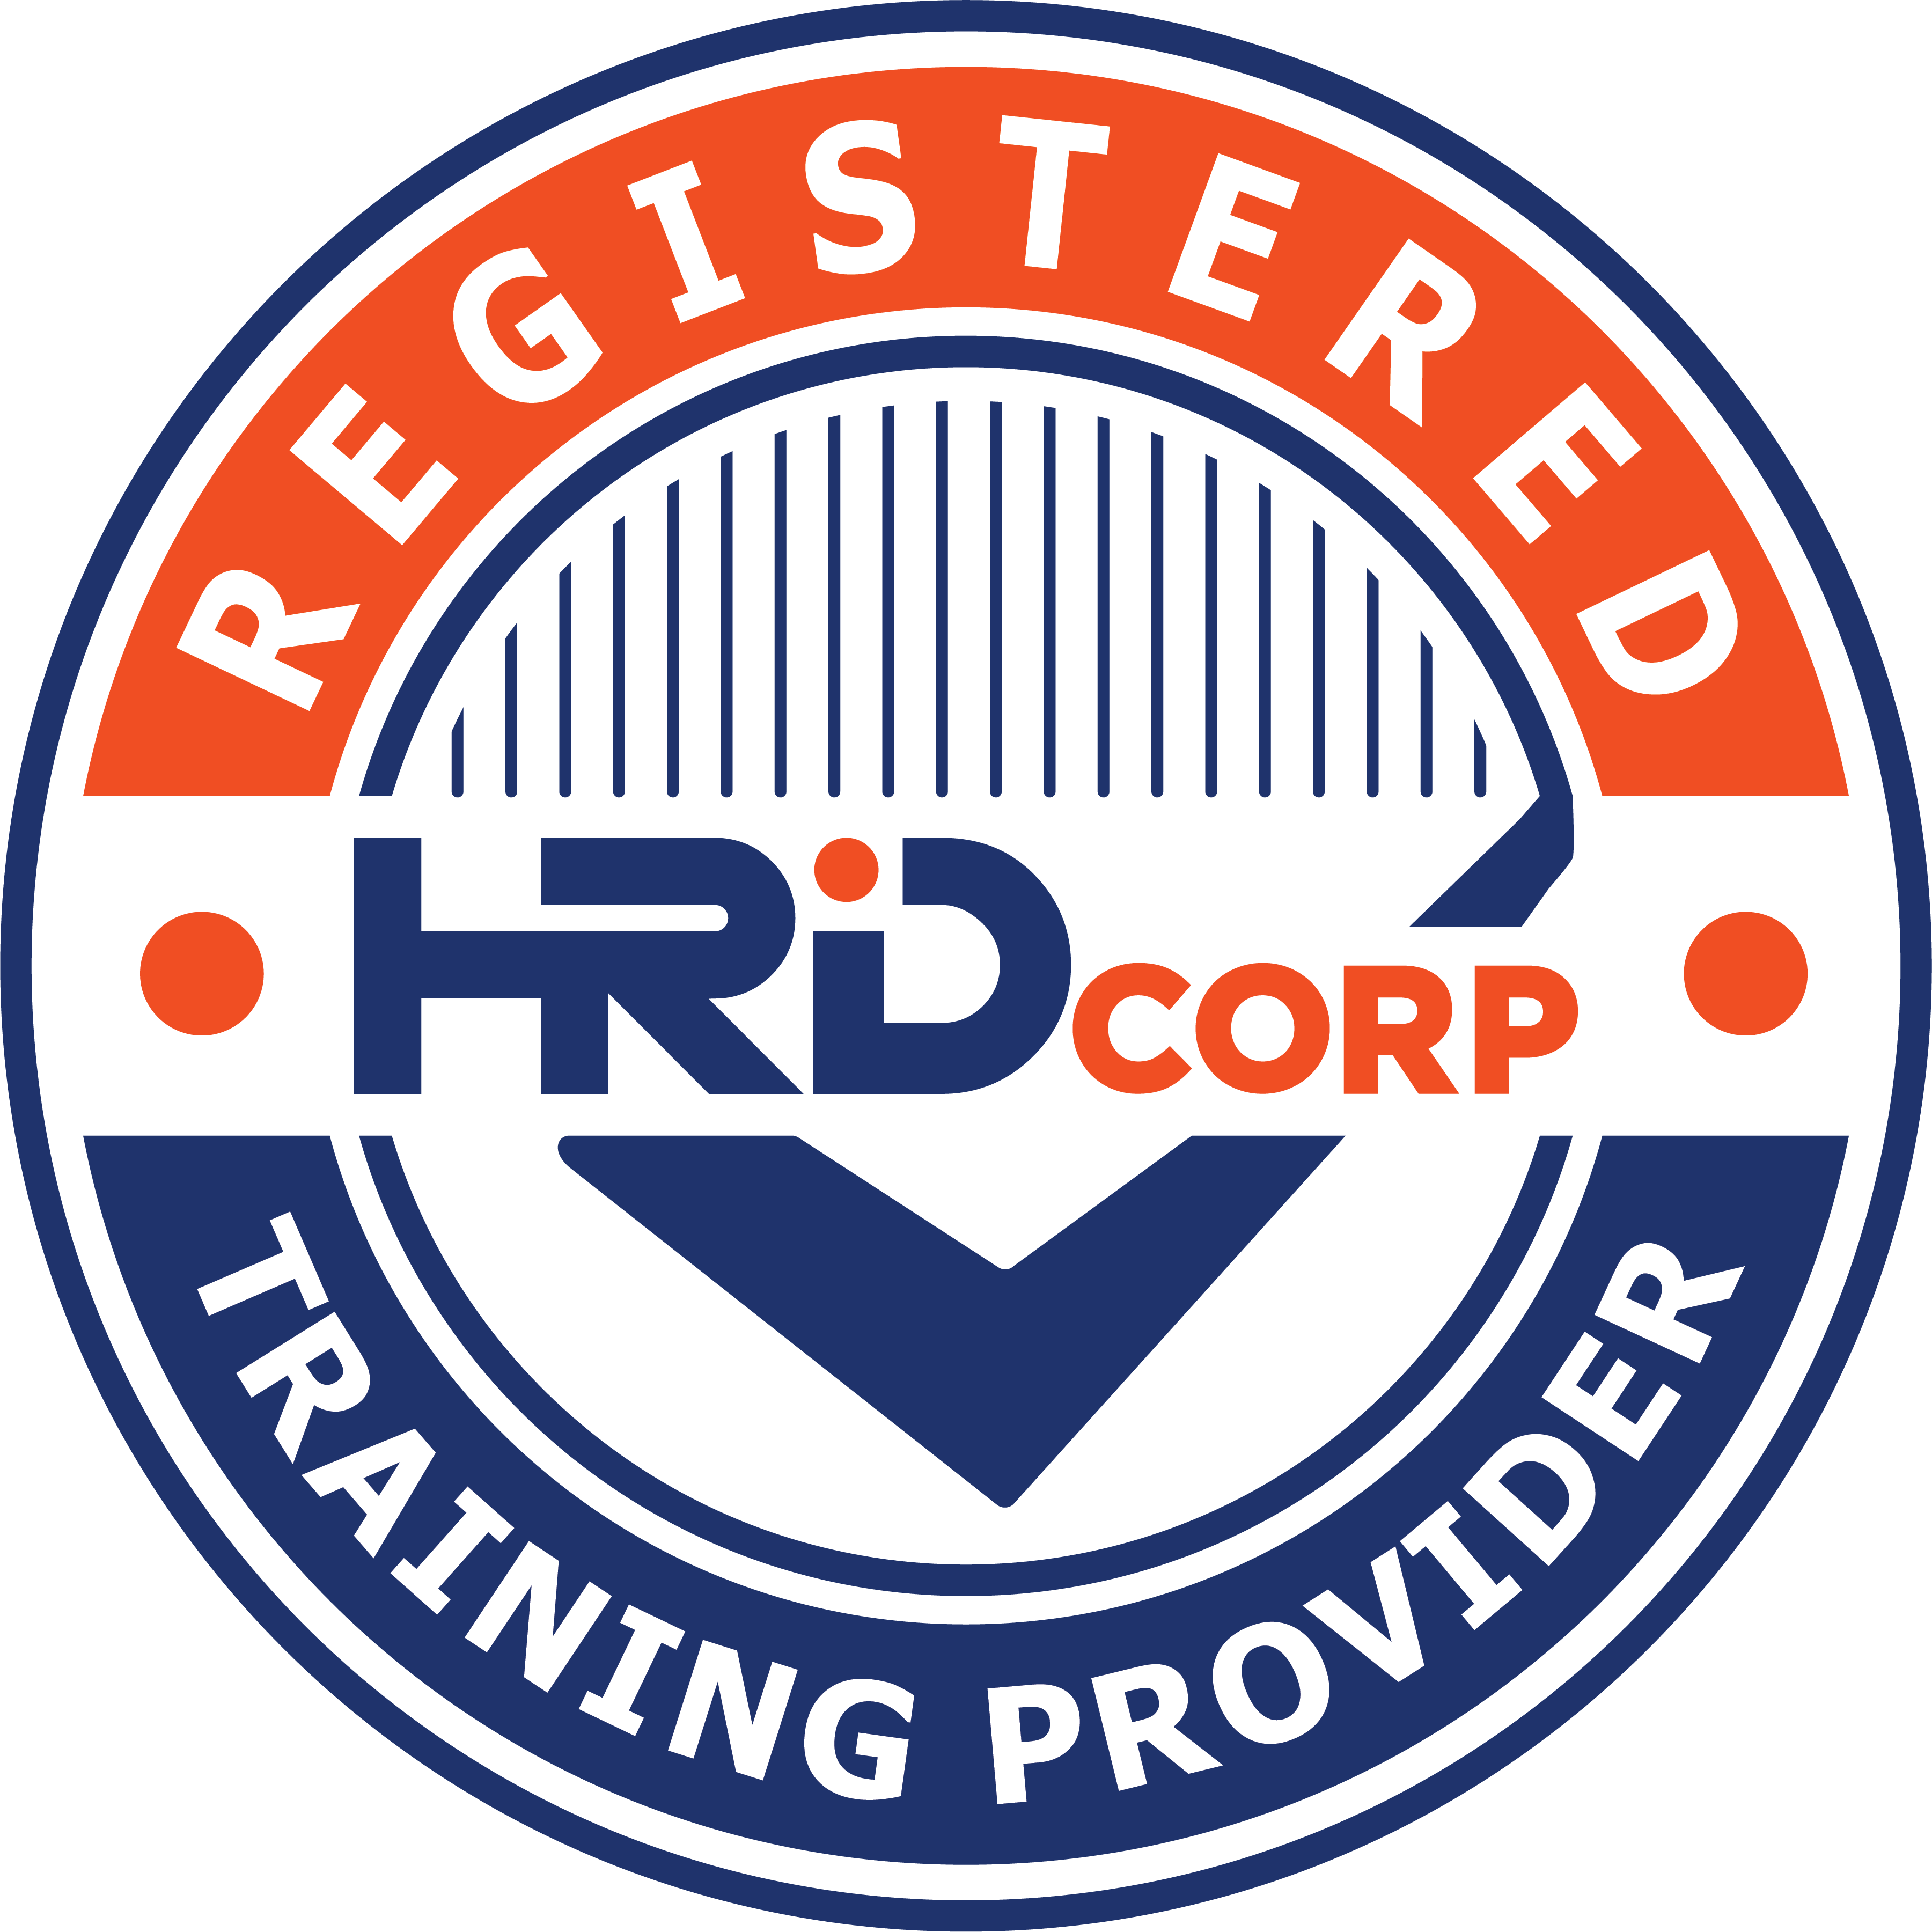 Approved Training Provider with HRDF (PSMB)